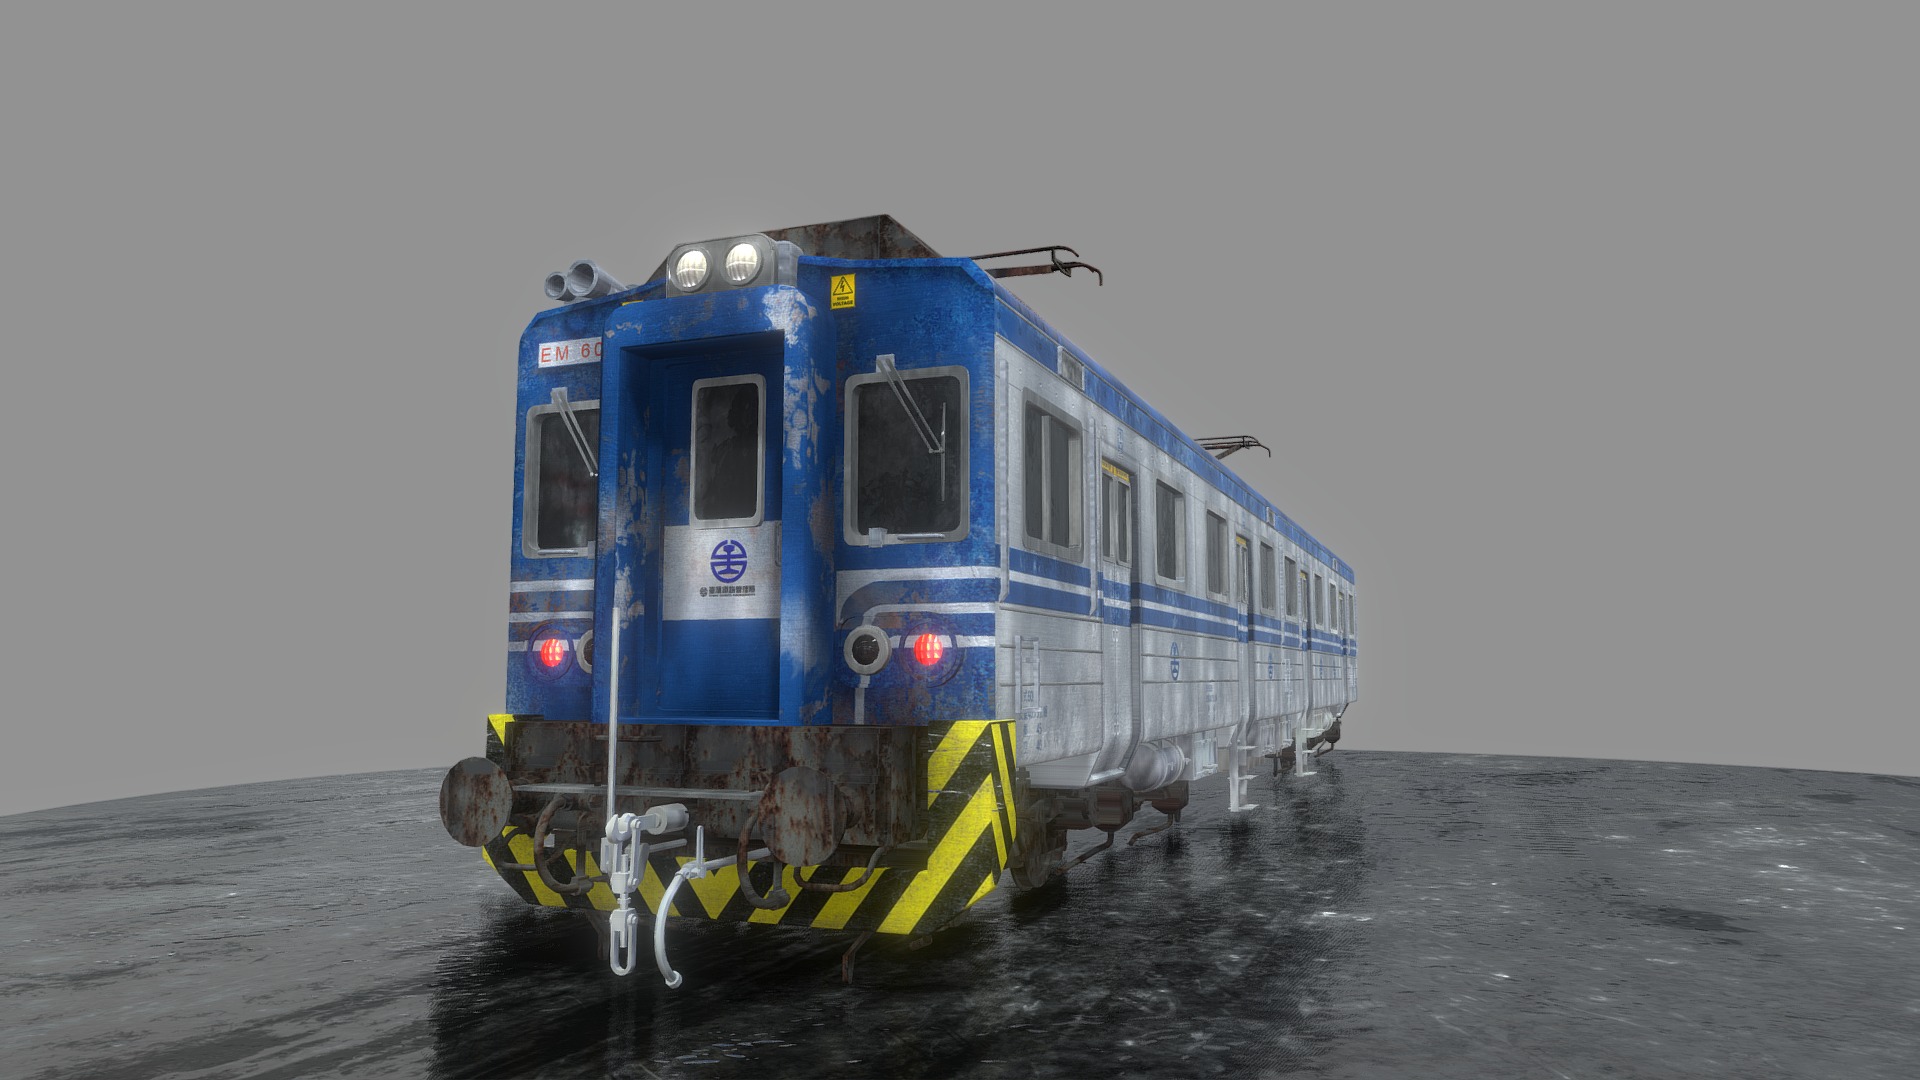 3D model TRA Passenger carriage - This is a 3D model of the TRA Passenger carriage. The 3D model is about a train on a platform.